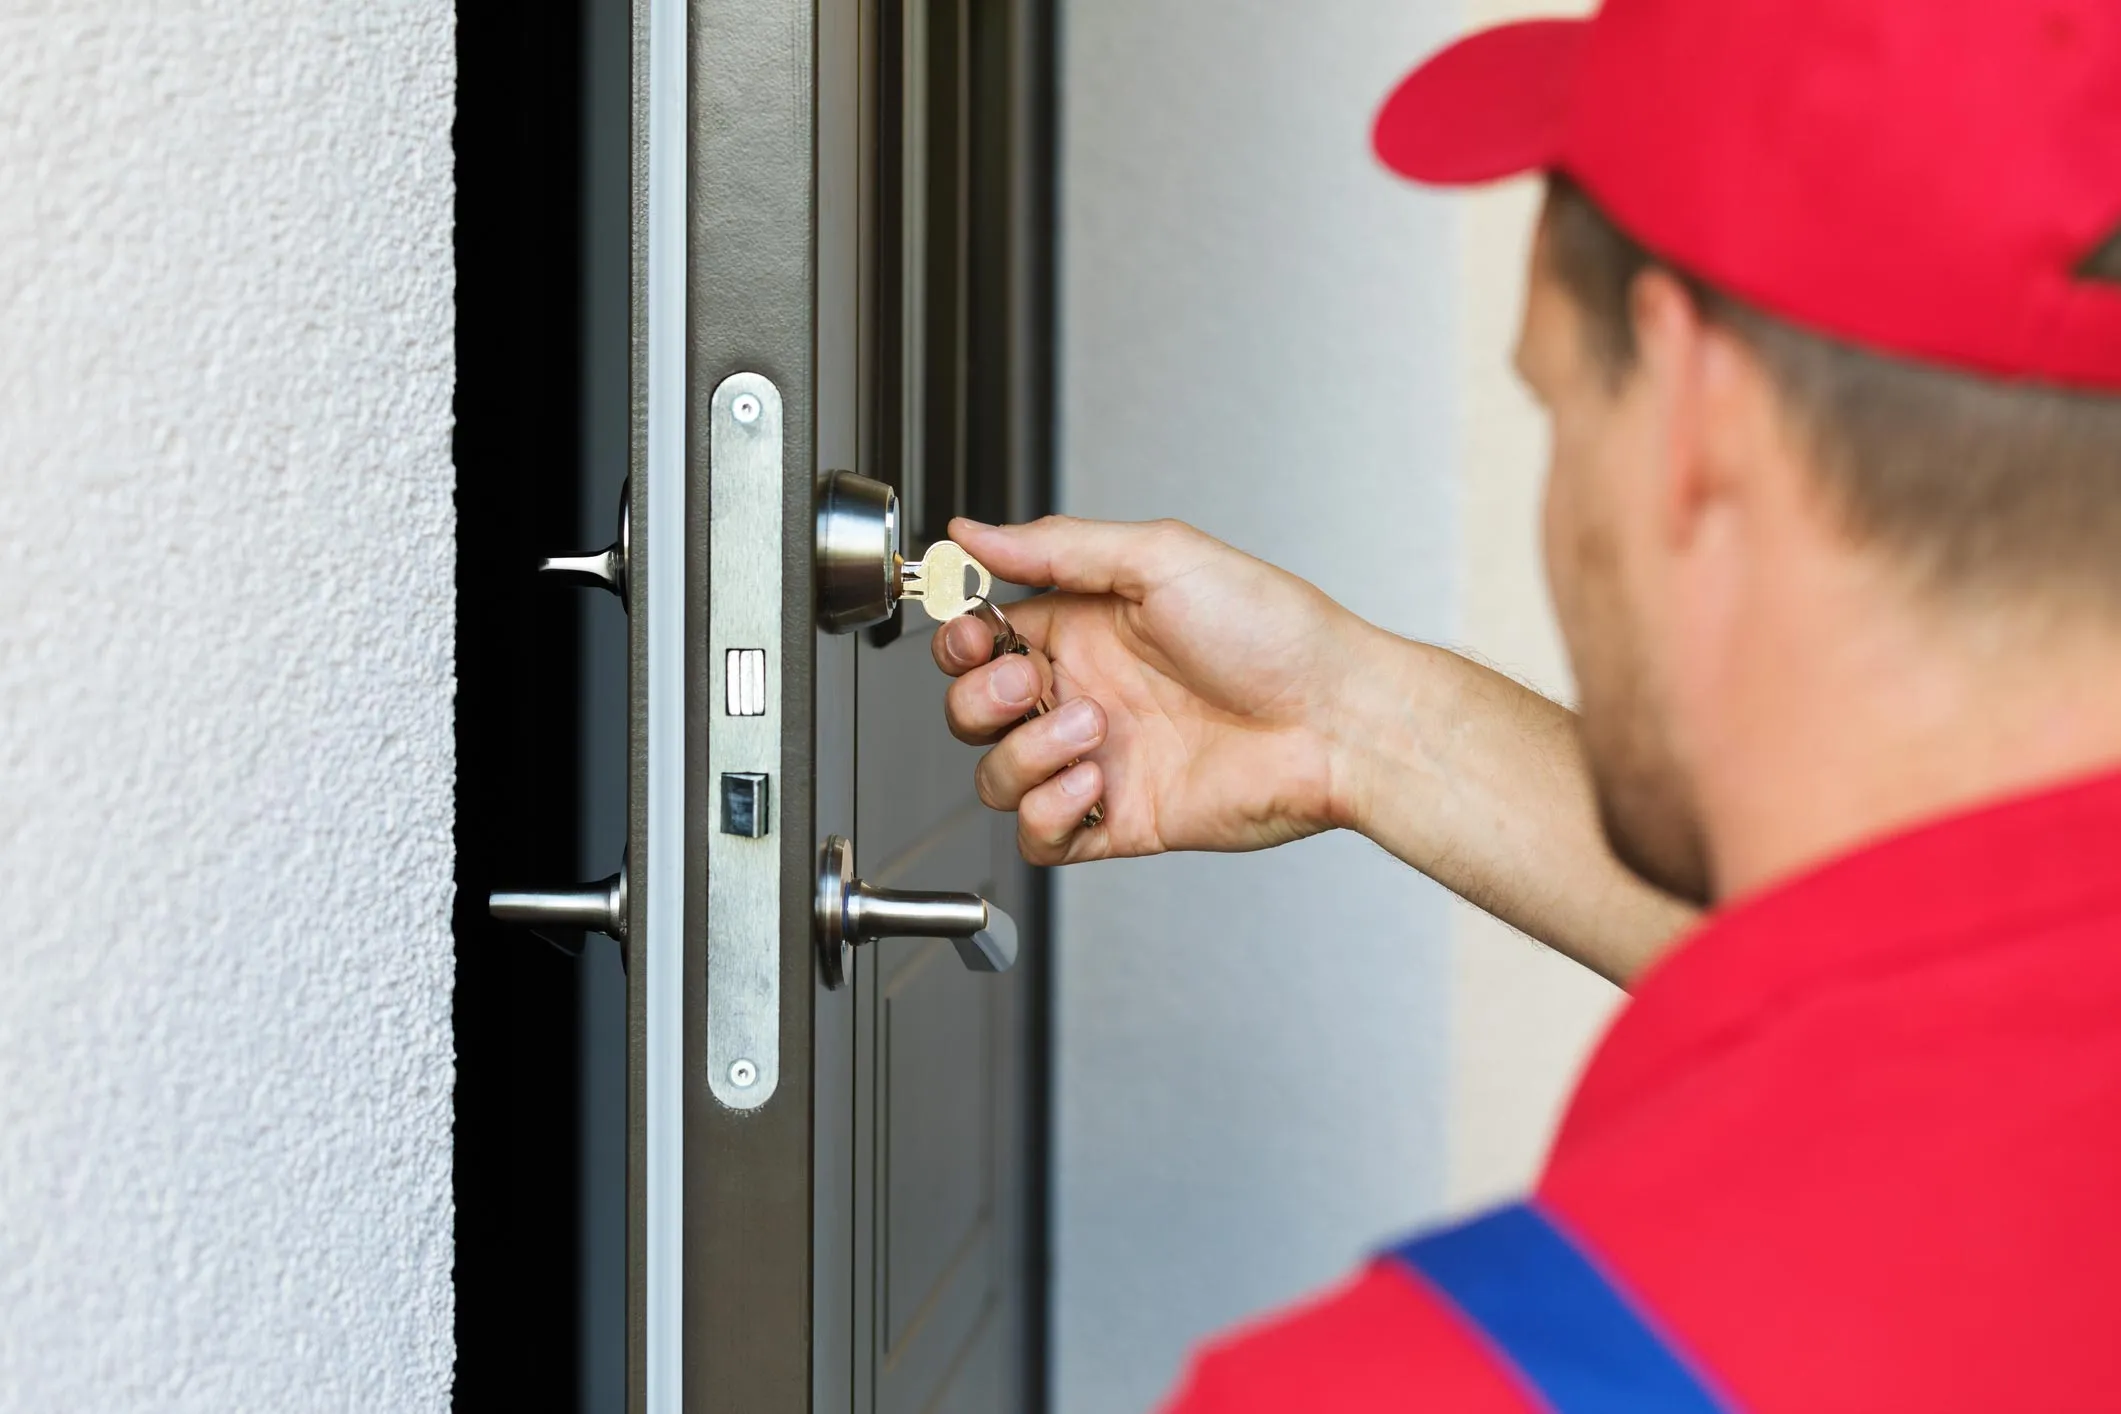 Reasons Why People Need Emergency Locksmith Services